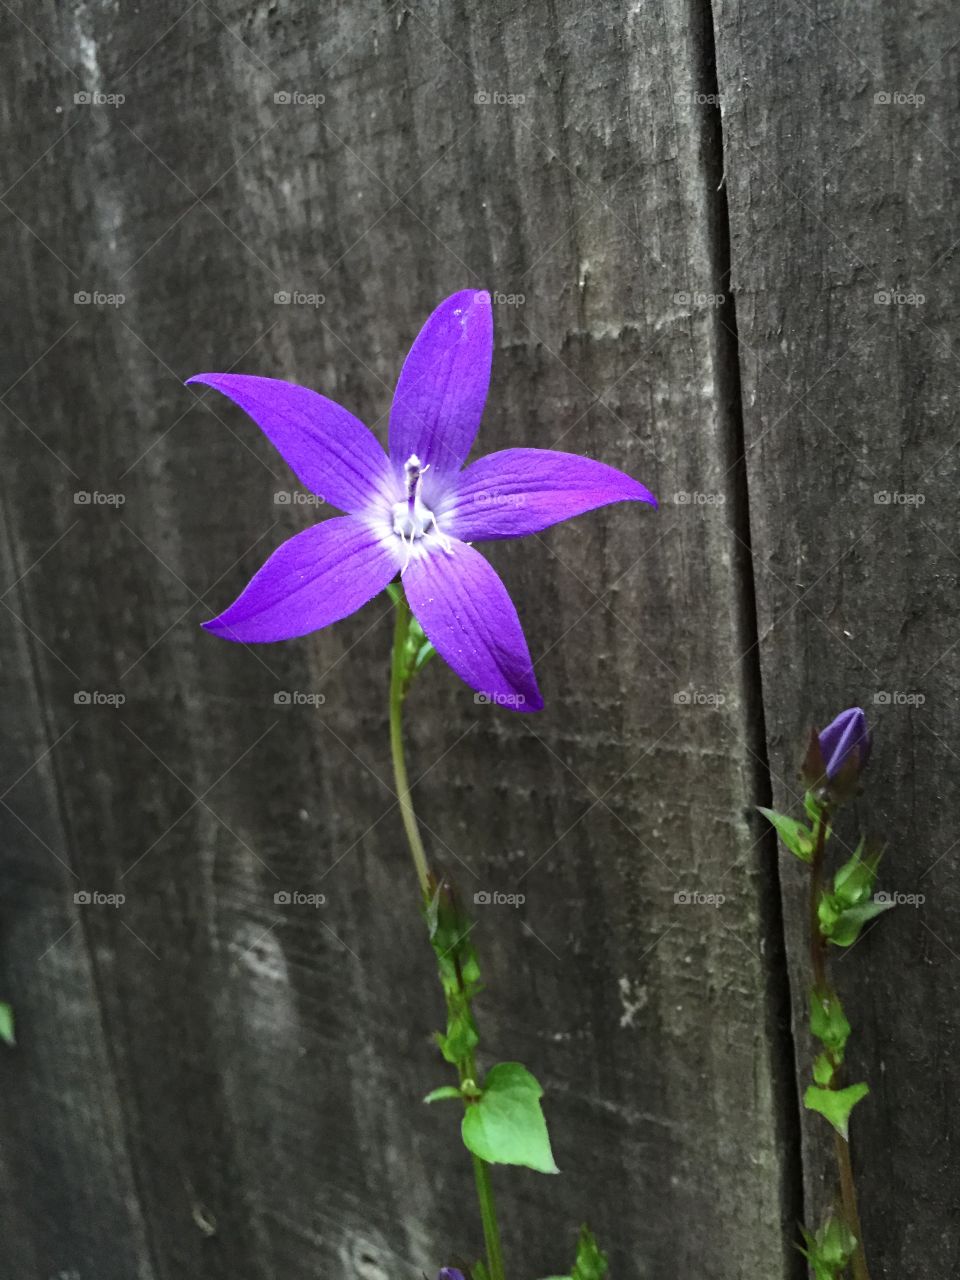 Creeping Flower . Delicate purple flower creeping up a fence